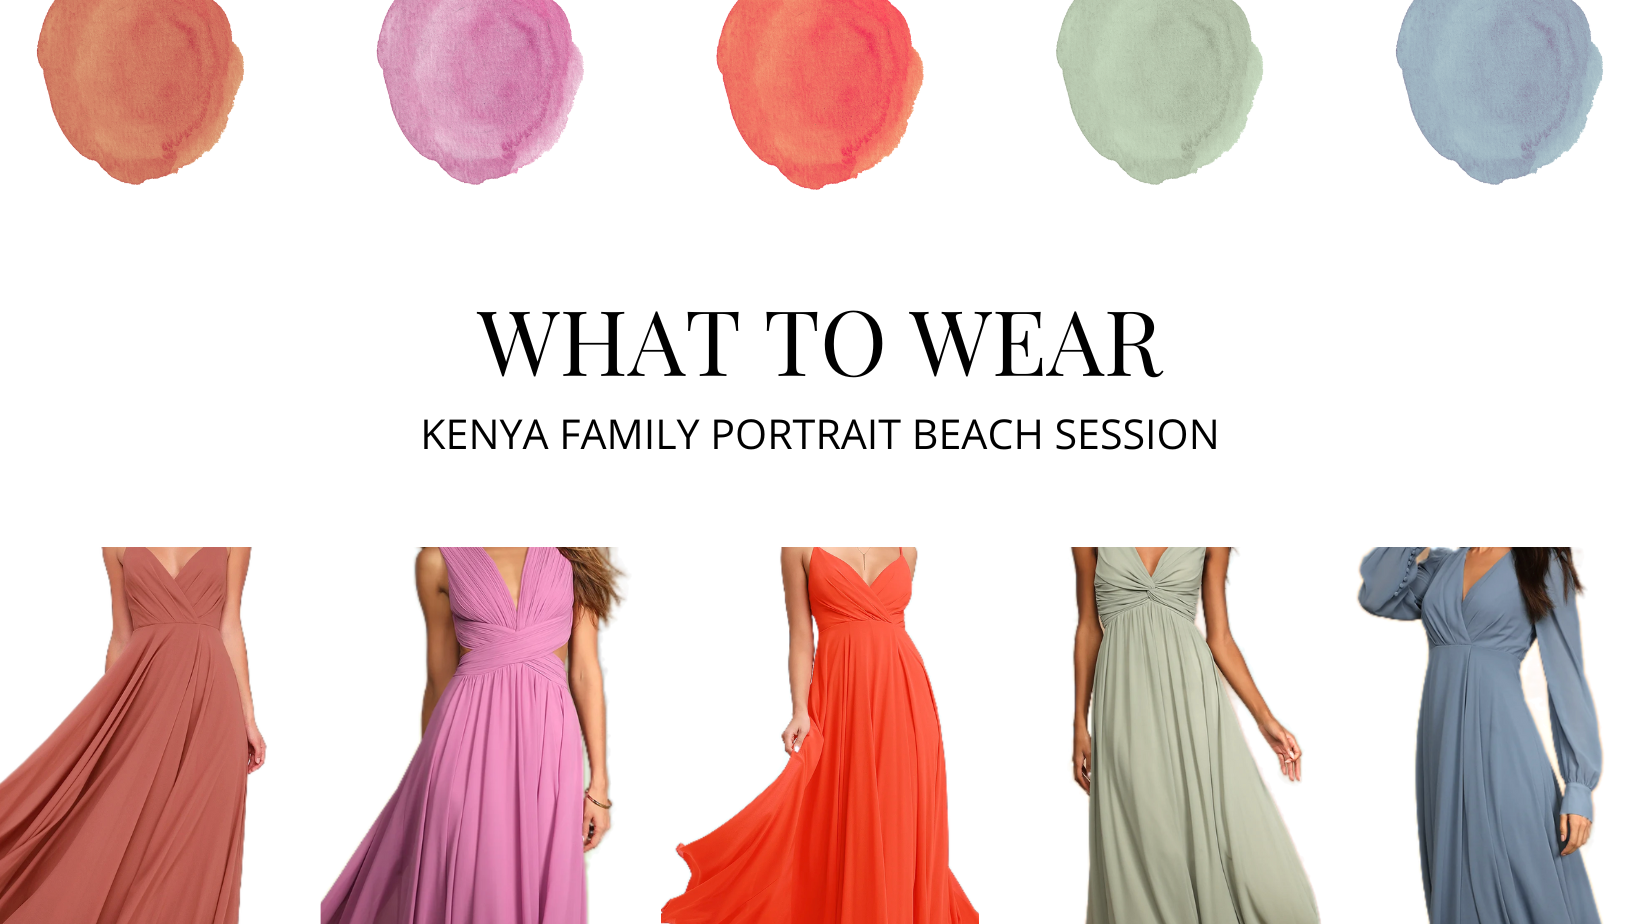 What to Wear for your Kenya Family Portrait Beach Session — Jafassam Photography Studio